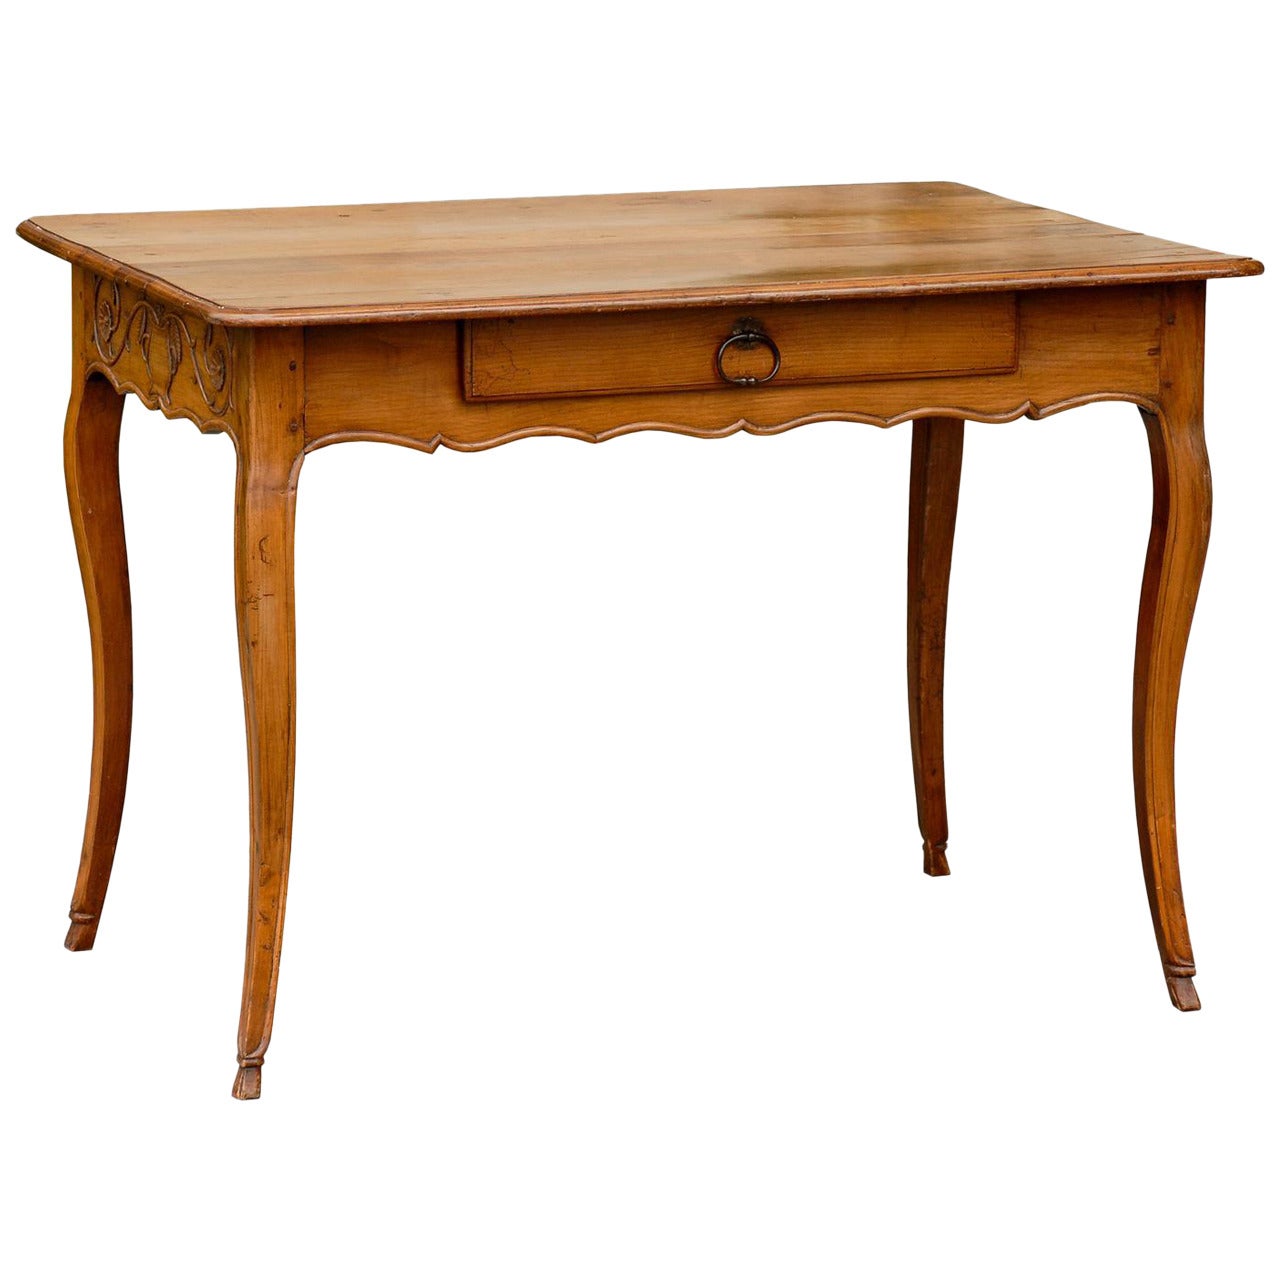 French Louis XV Style Fruitwood Desk with Rinceaux Decorated Sides and Drawer